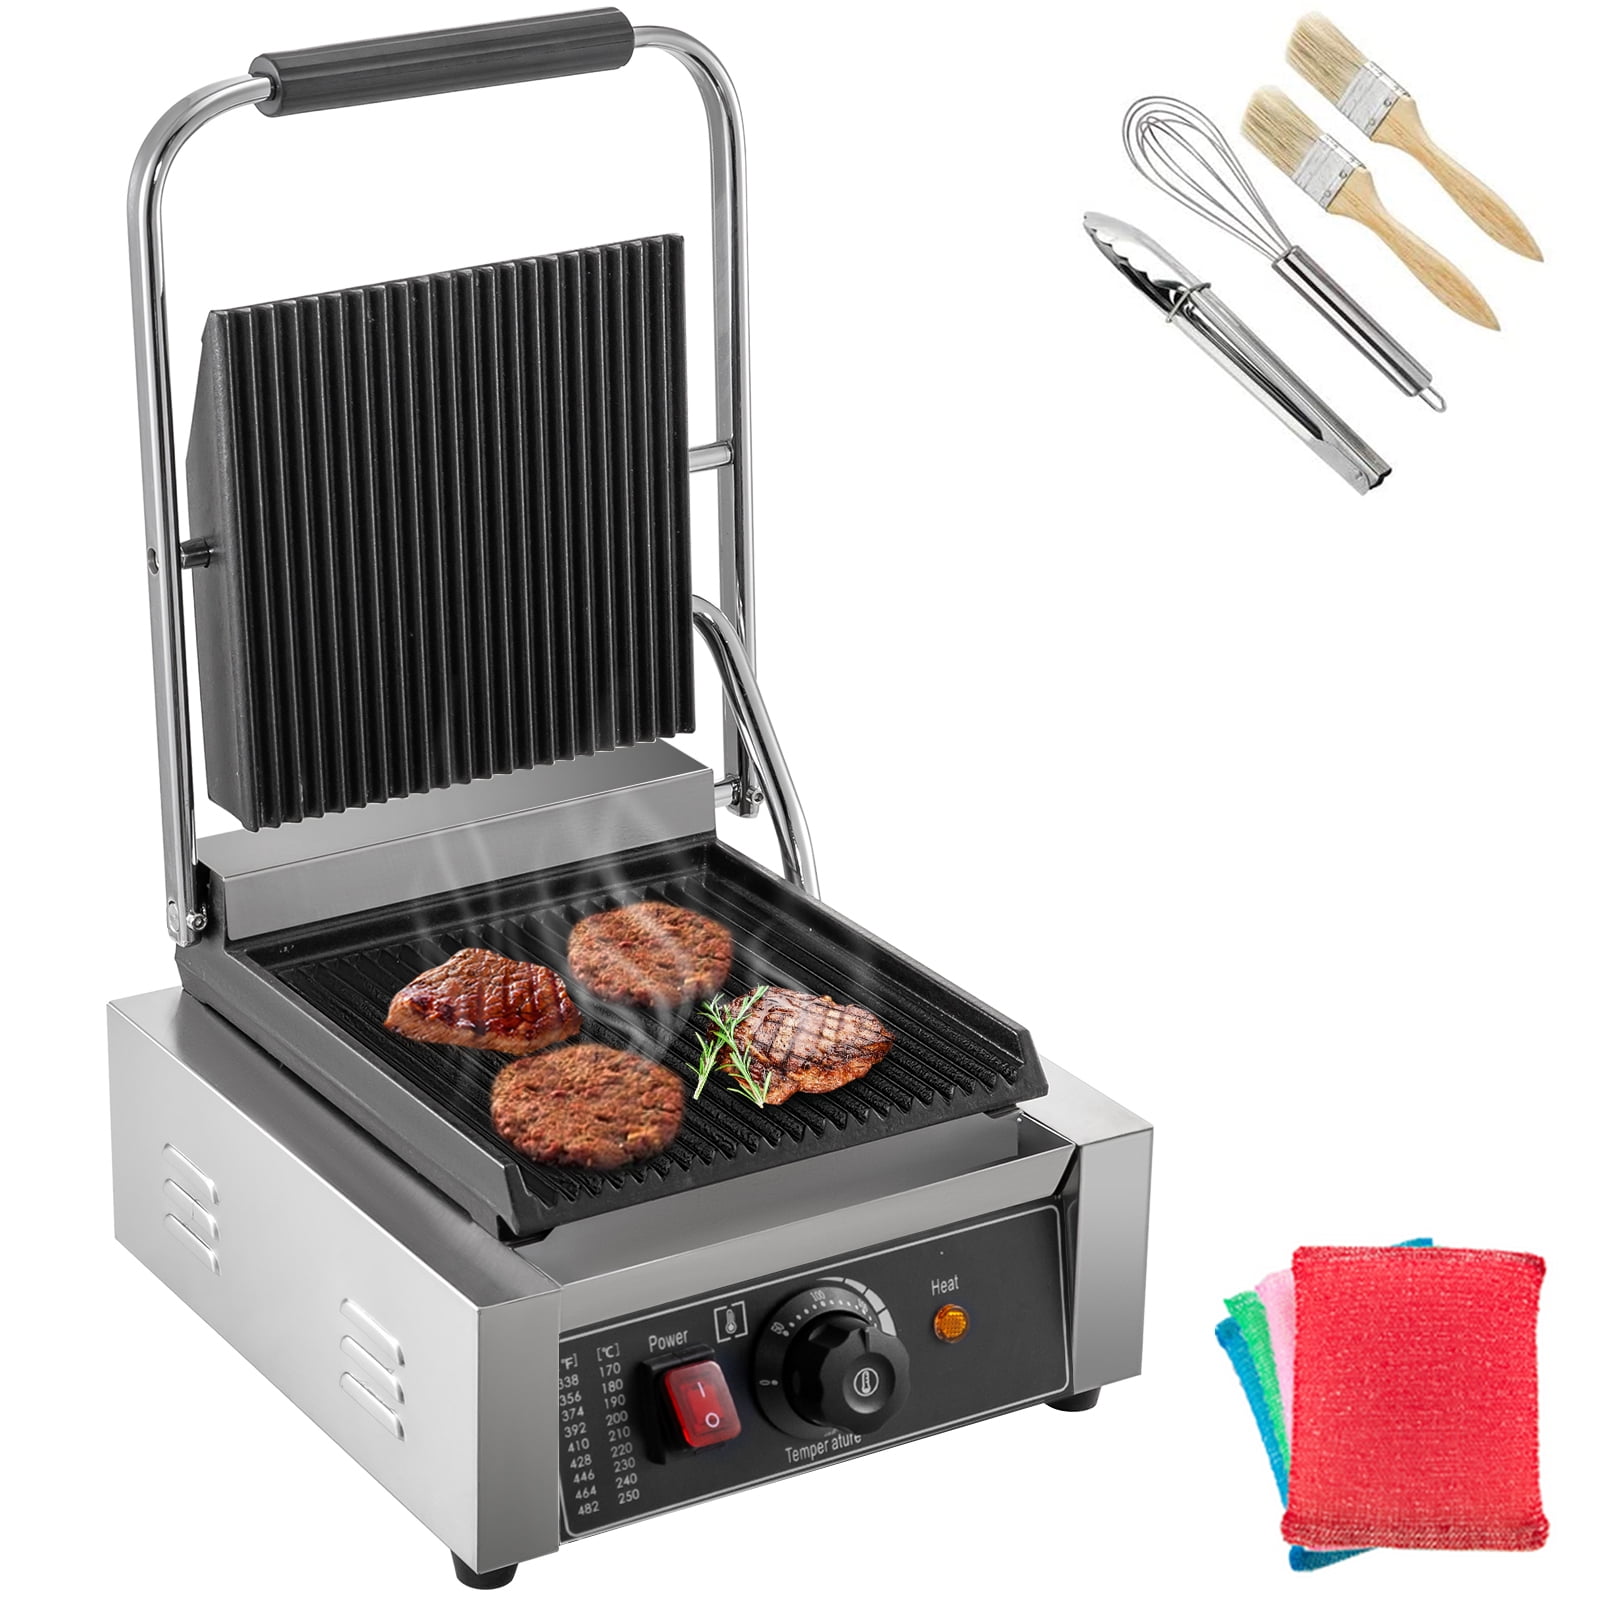 VEVORbrand 110V Commercial Sandwich Press Grill 1800w Electric Panini Maker  Non-Stick 122°F-572°F Temp Control Full Grooved Plates for Hamburgers  Steaks, Professional Cooking Equipment 